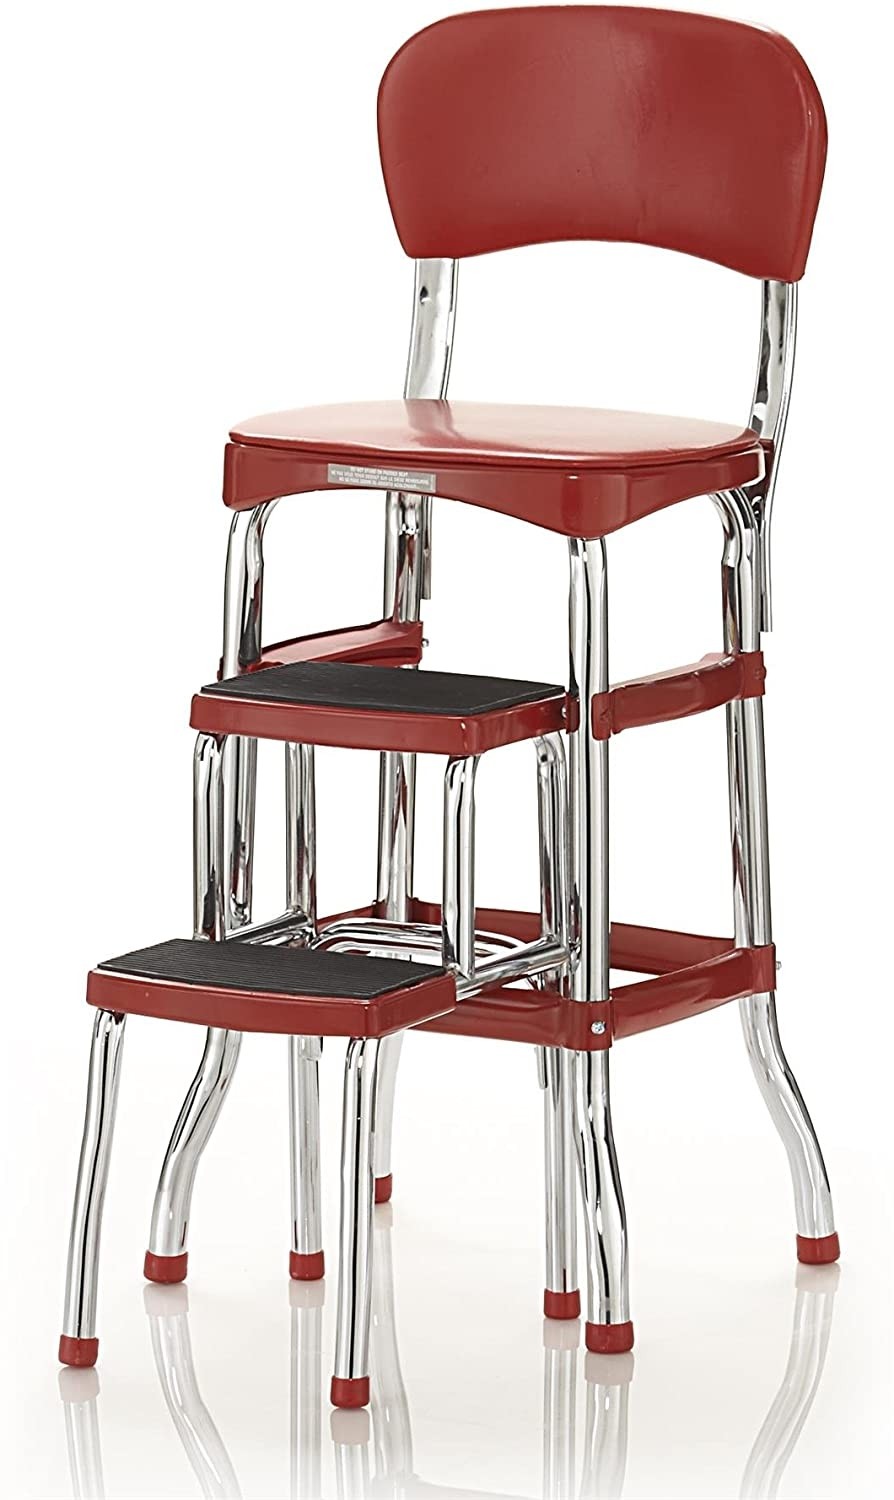 Step stool chair retro counter padded vintage style ebay